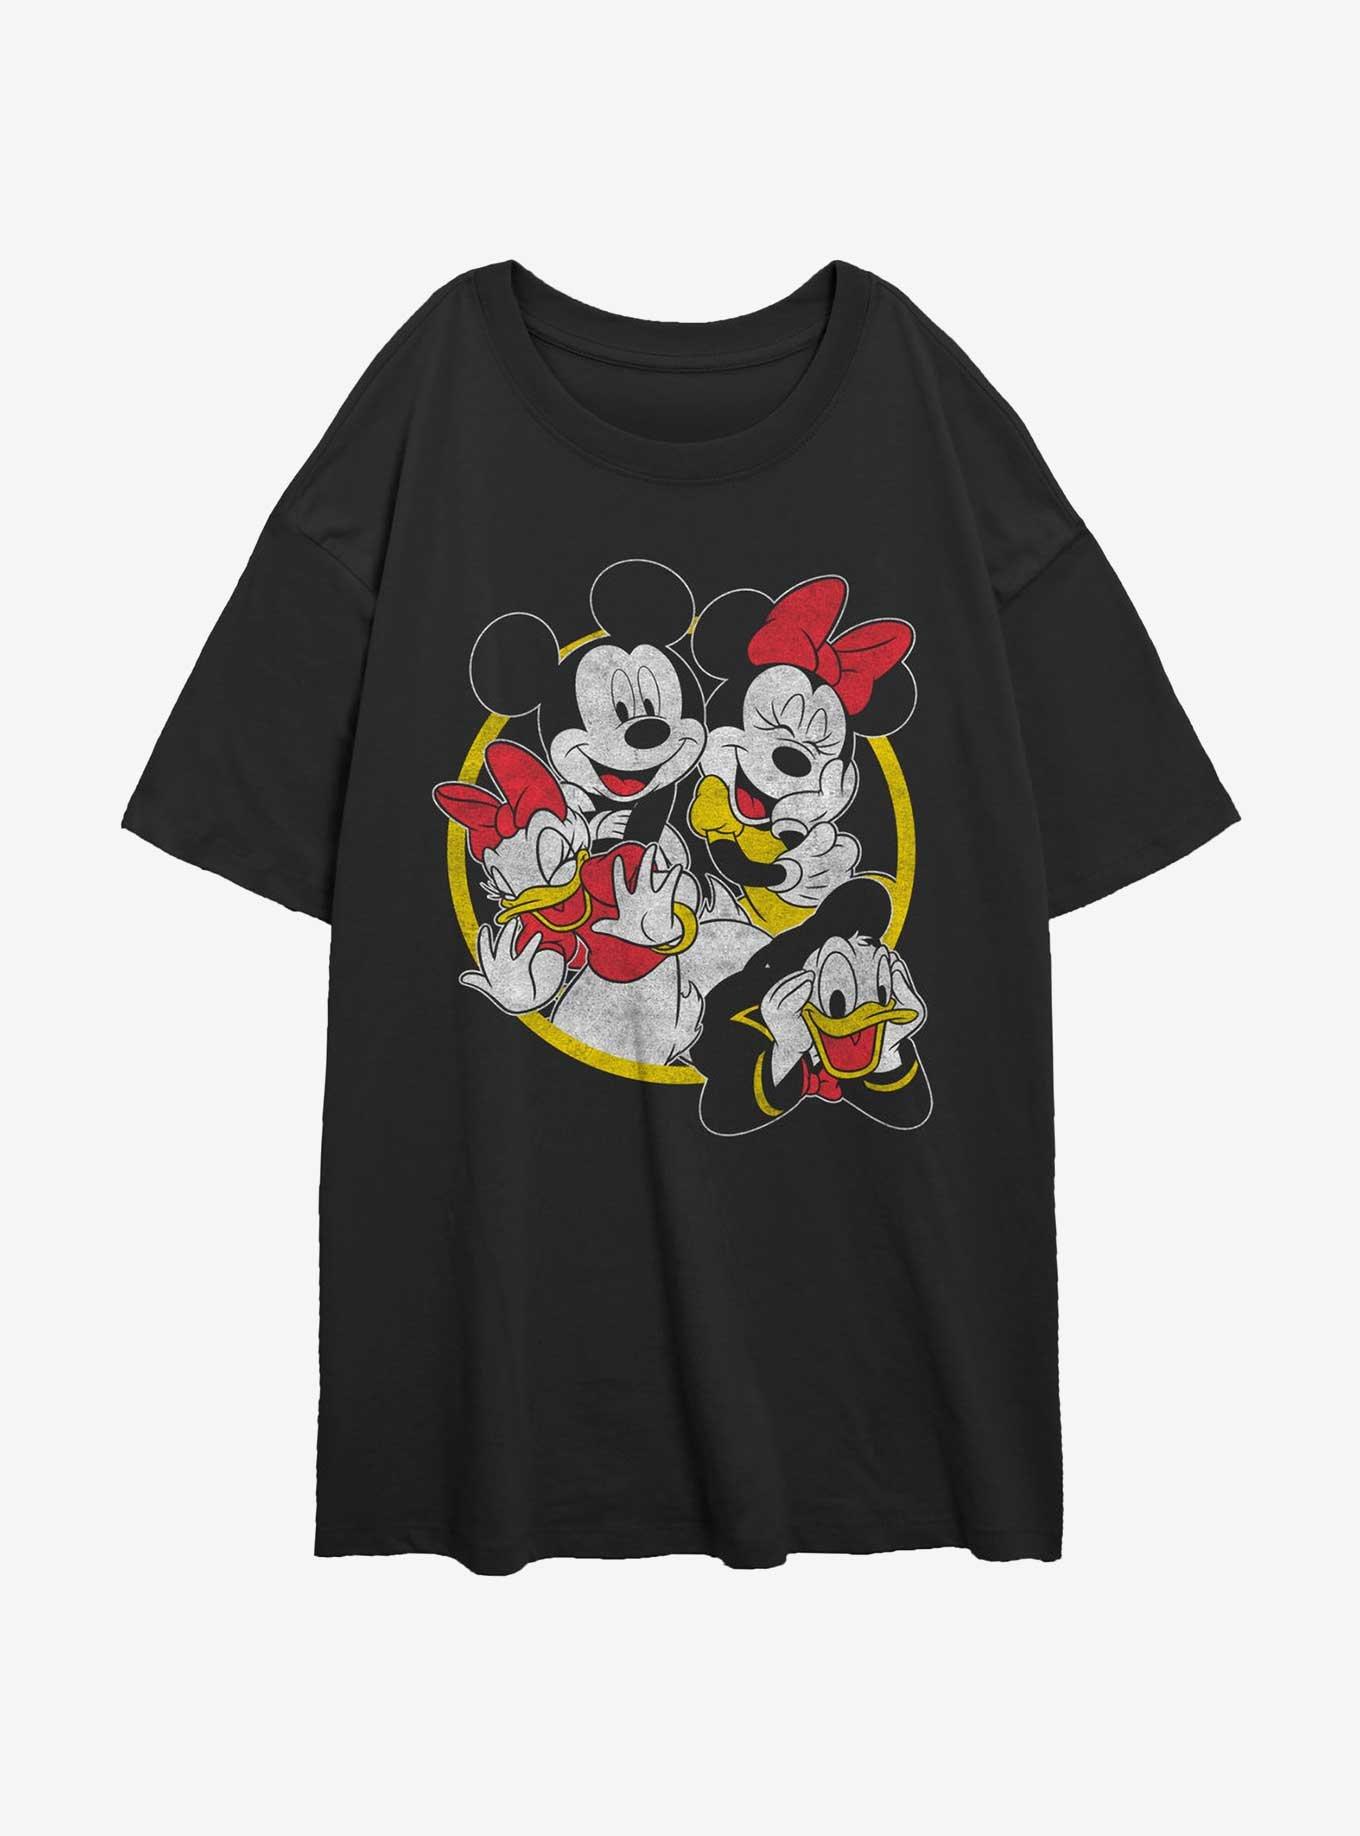 Disney Mickey Mouse Classic Couples Girls Oversized T-Shirt, BLACK, hi-res